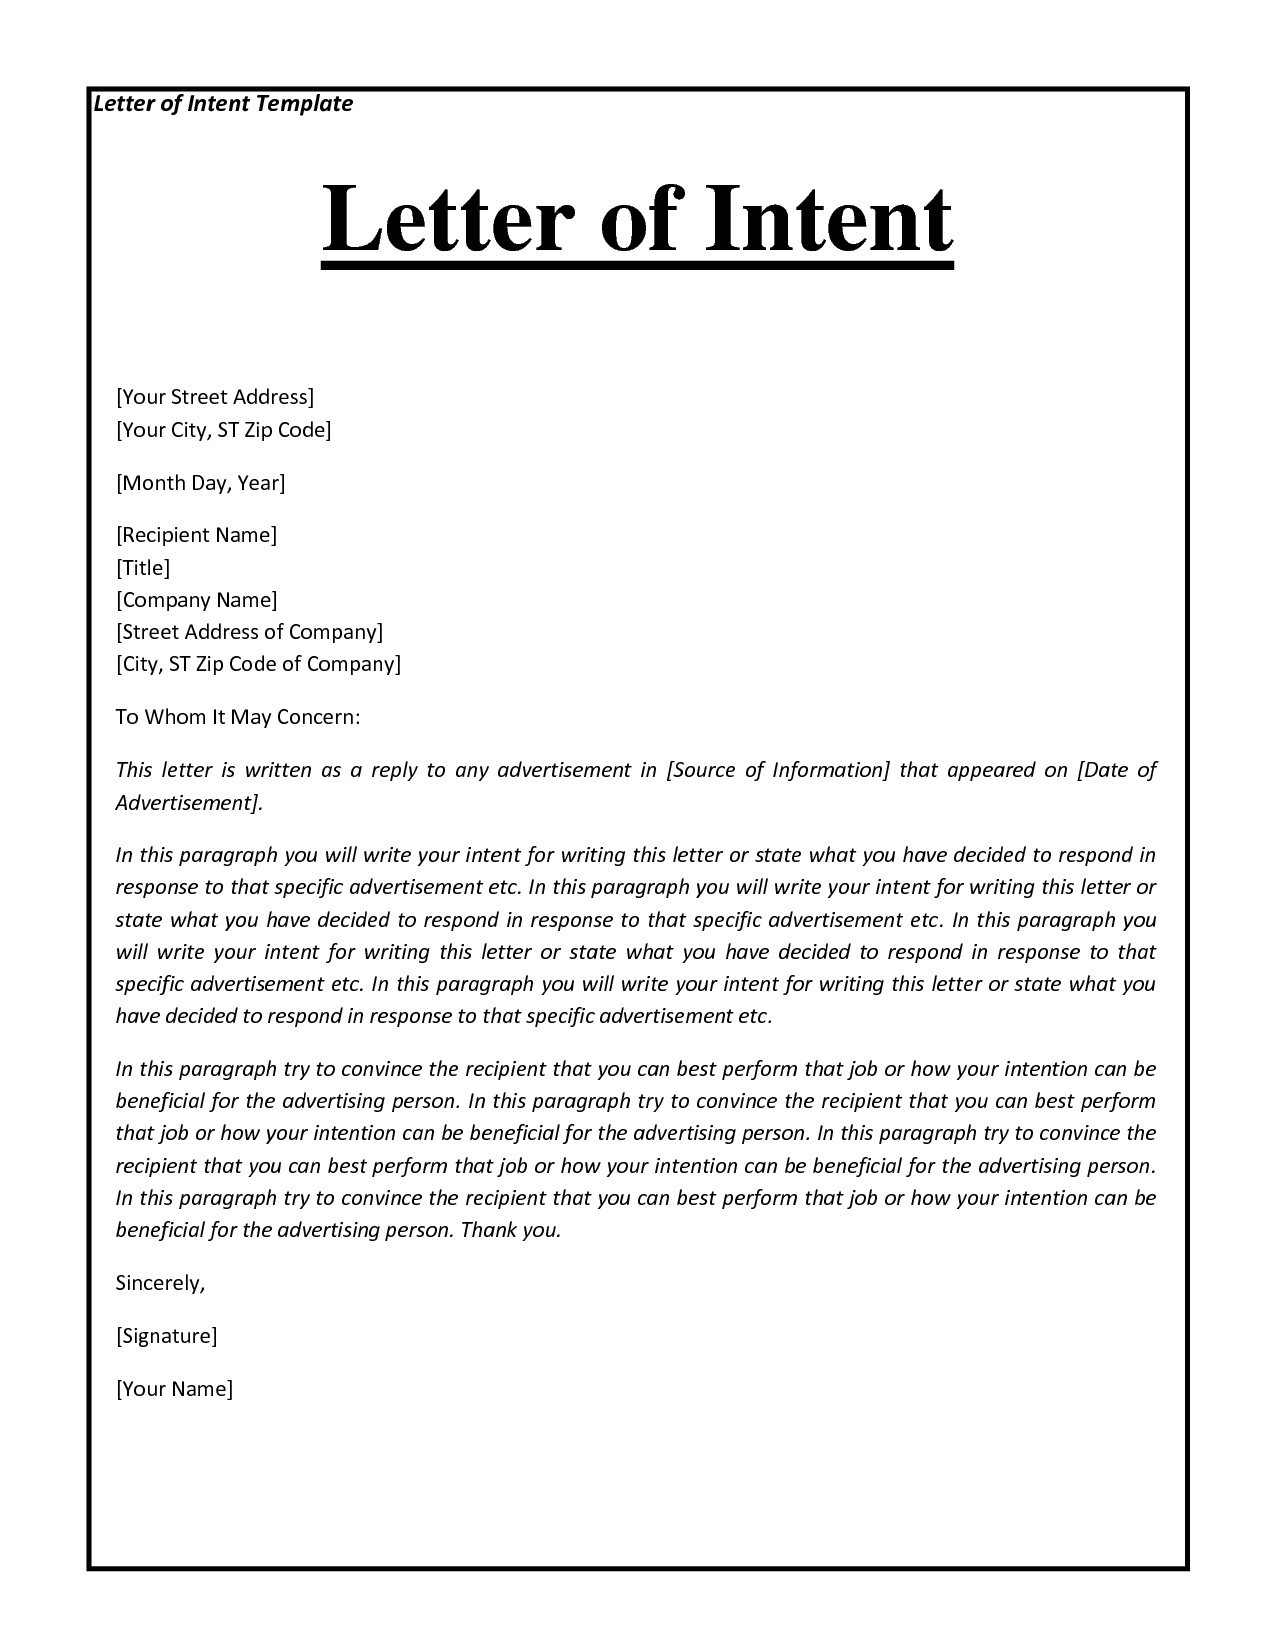 Generic Letter Of Intent Template - Letter Intent format for A Job Valid Letter Intent Template Job